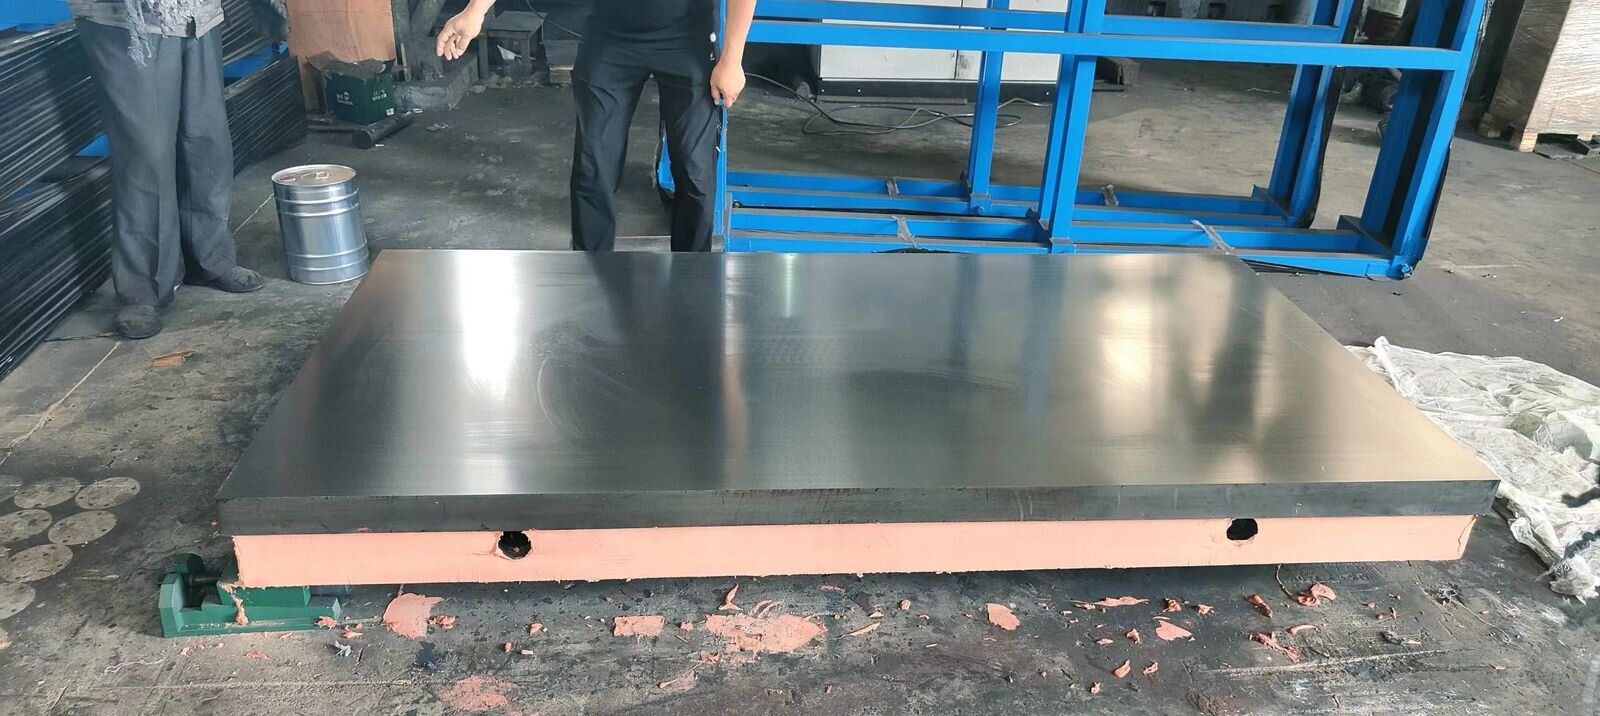 Cast iron surface plate